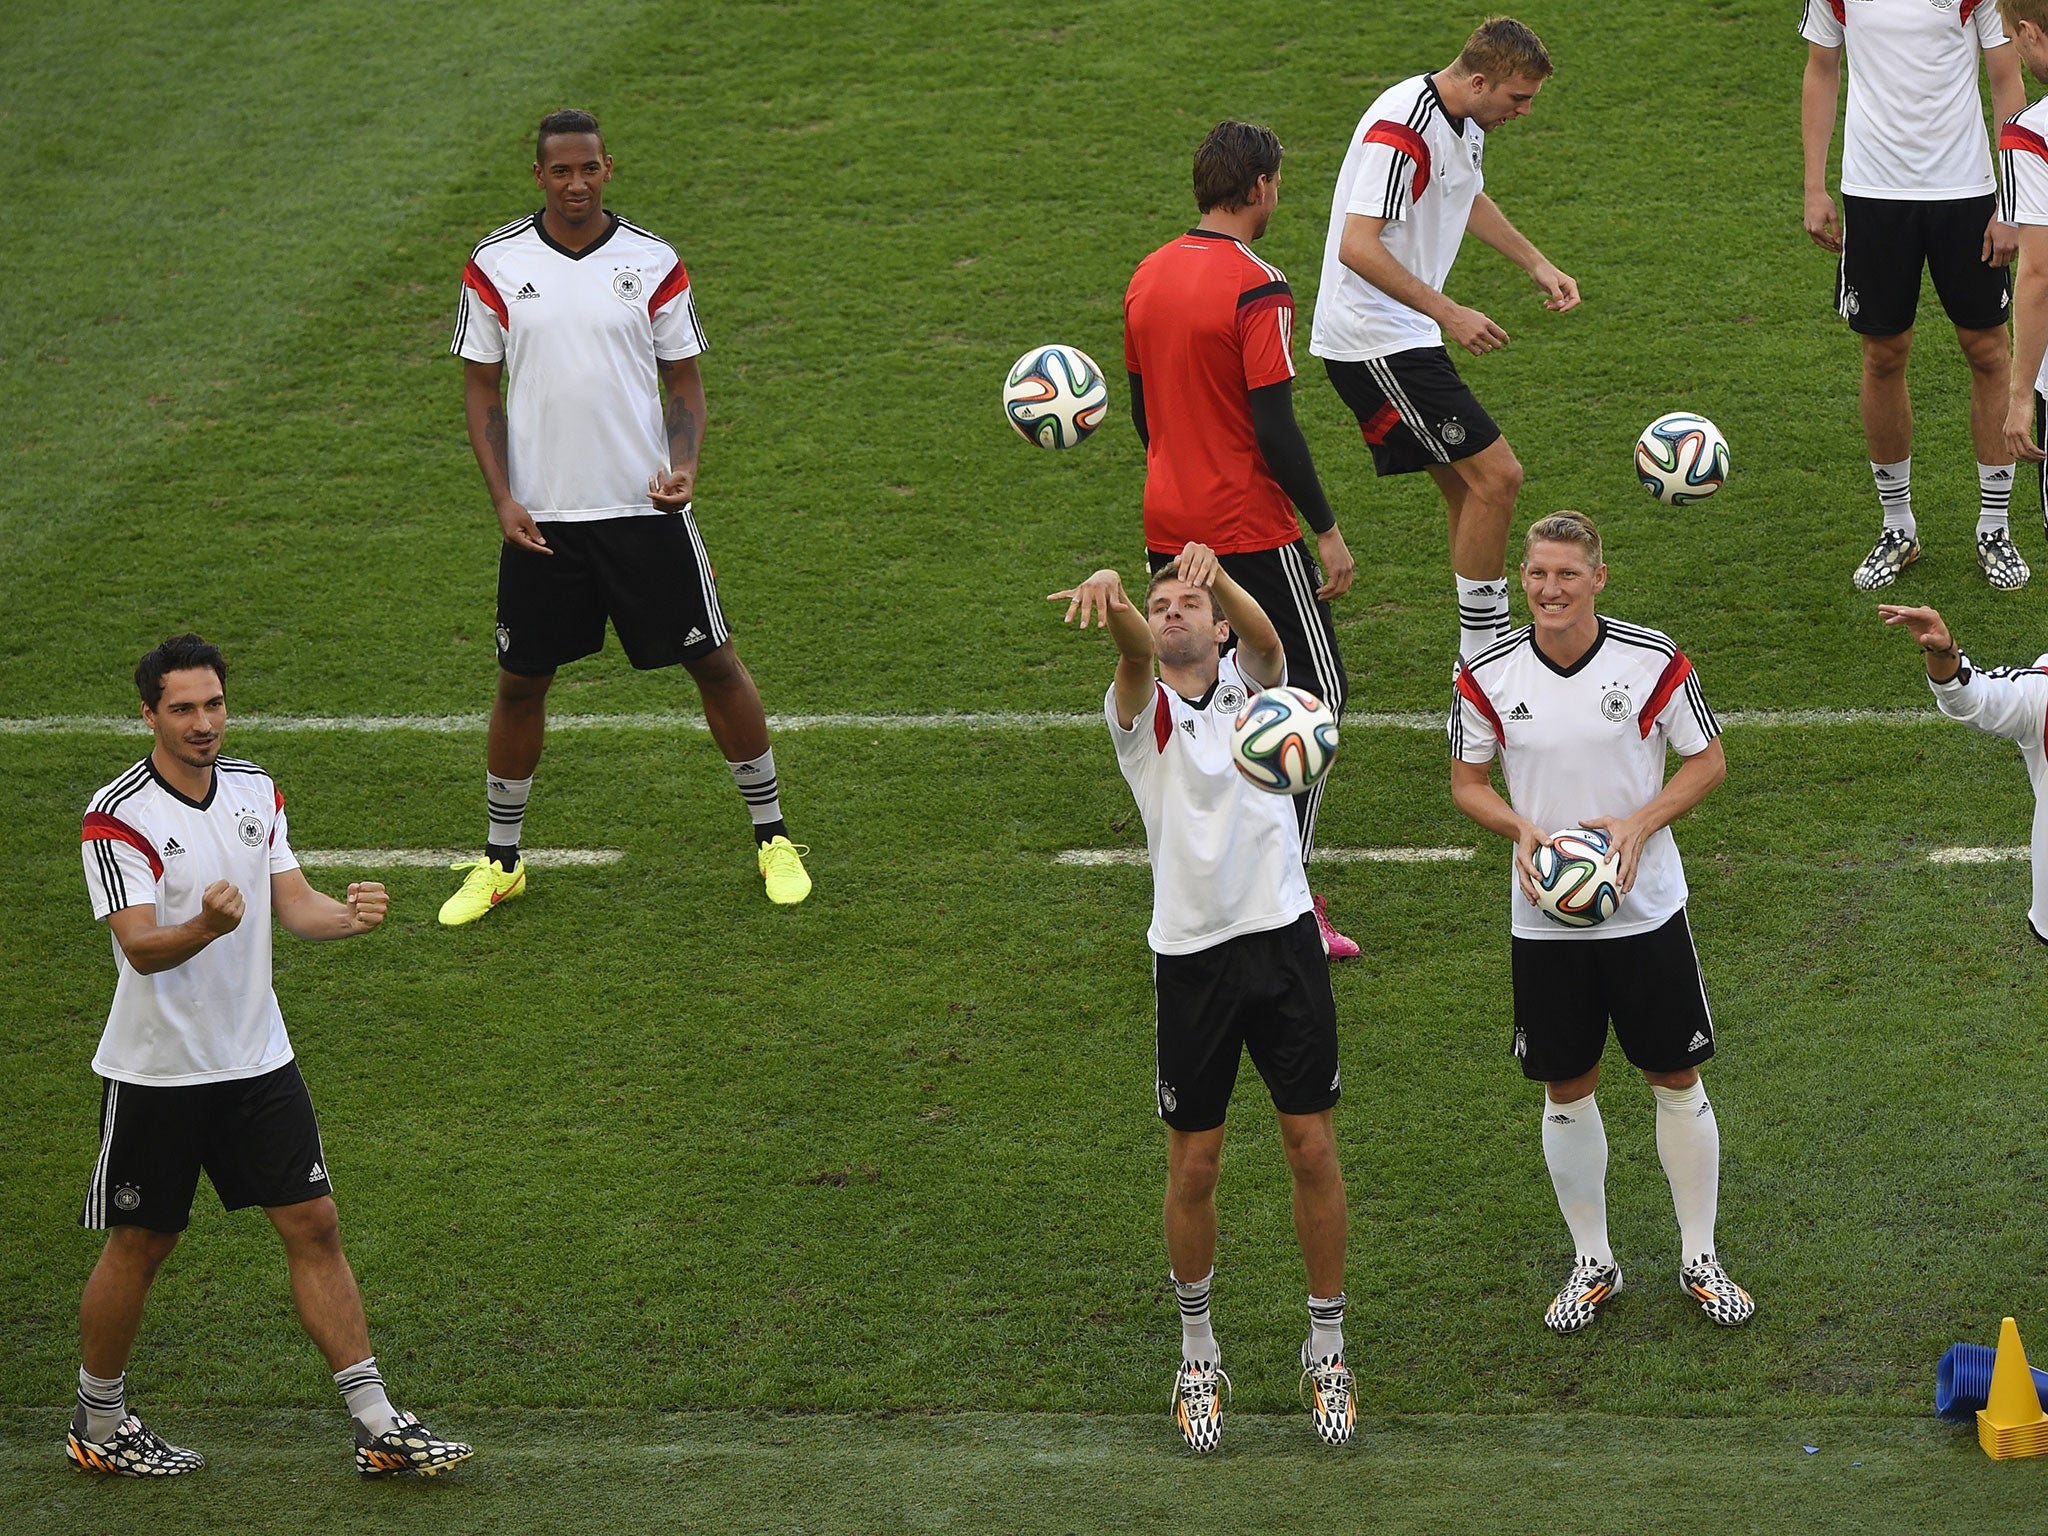 The German players who were ill have recovered and will be ready for the quarter-final against France